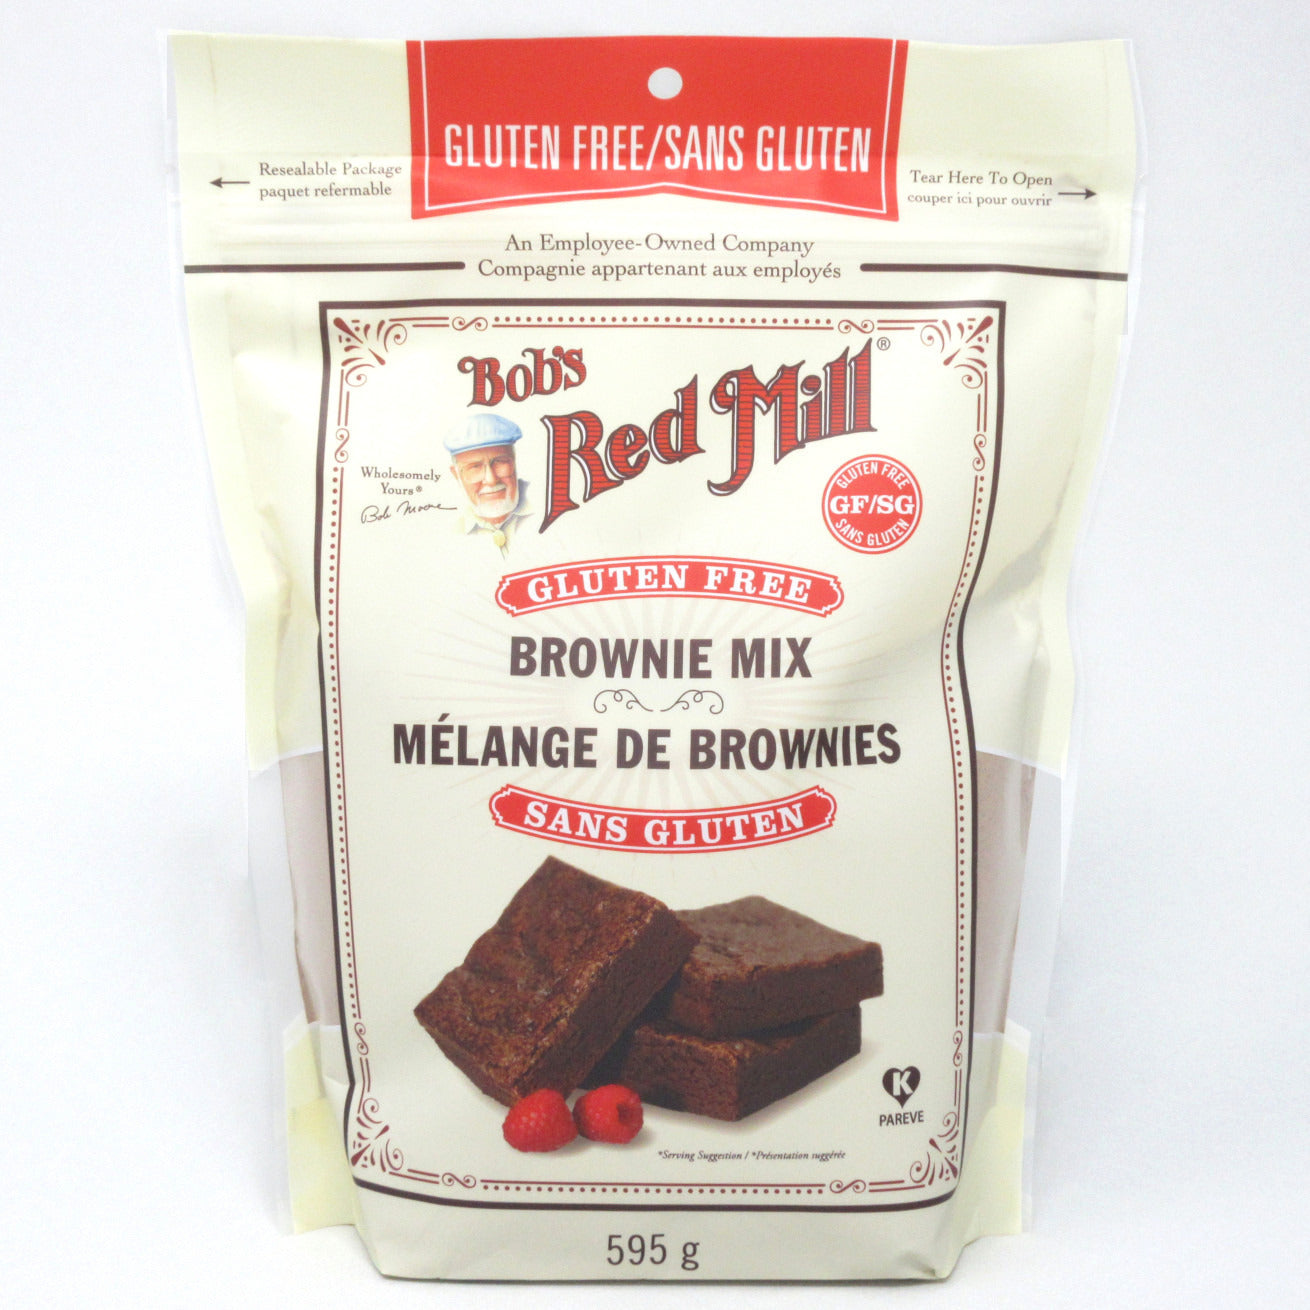 Flour Barrel product image - Bob's Red Mill Gluten Free Brownie Mix